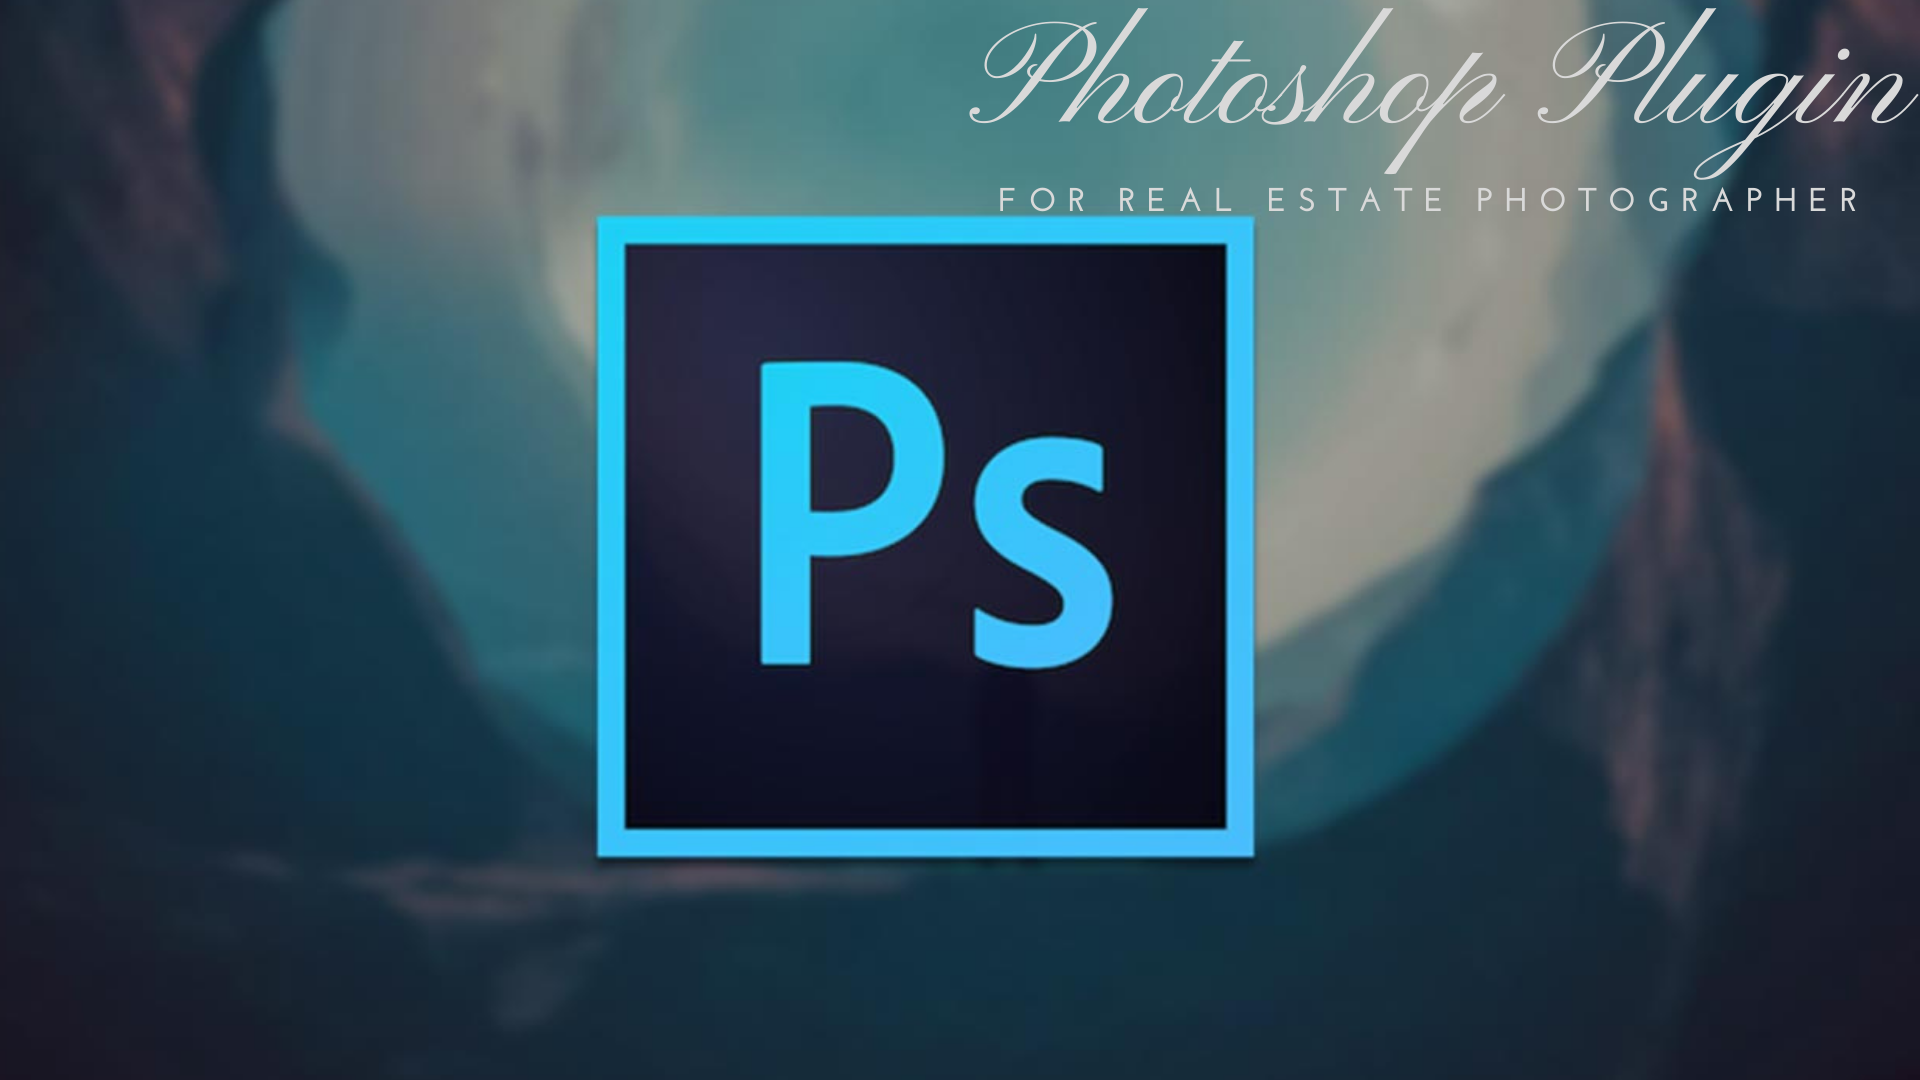 photoshop-plug-in-for-real-estate-photographer